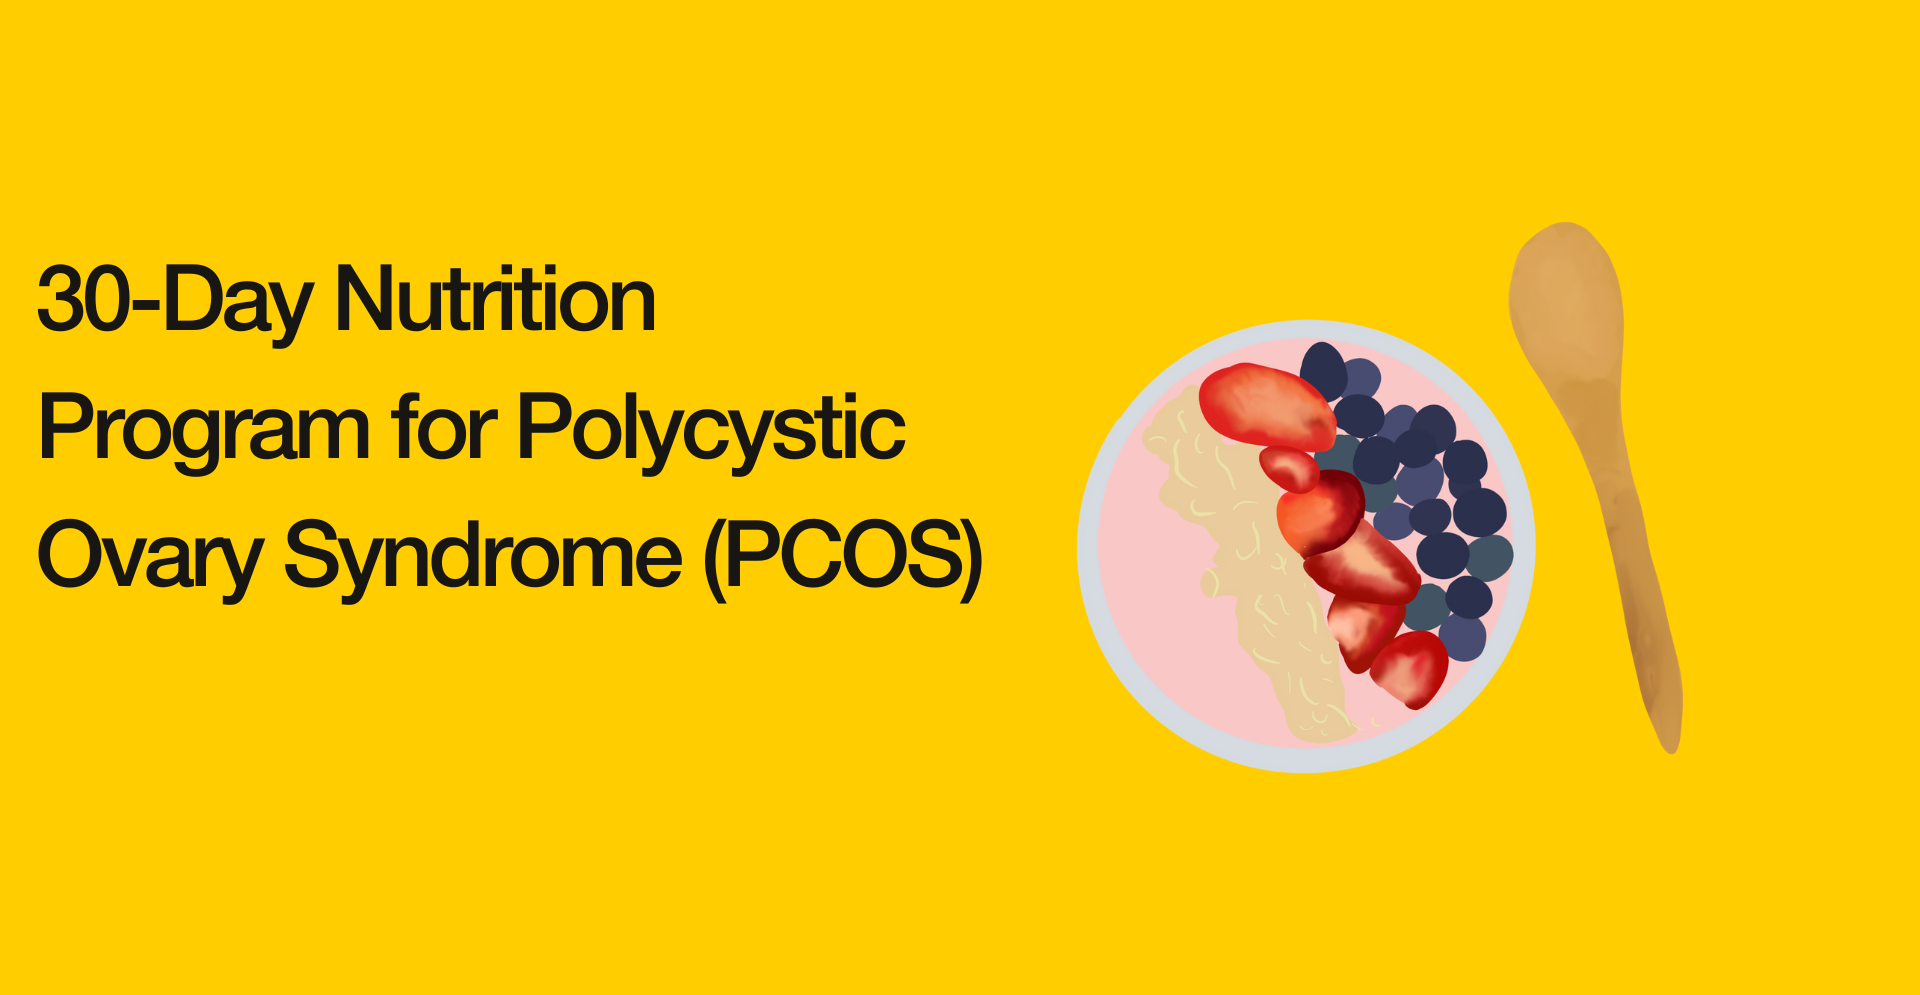 Sample 30-Day Nutrition Program for Polycystic Ovary Syndrome (PCOS):